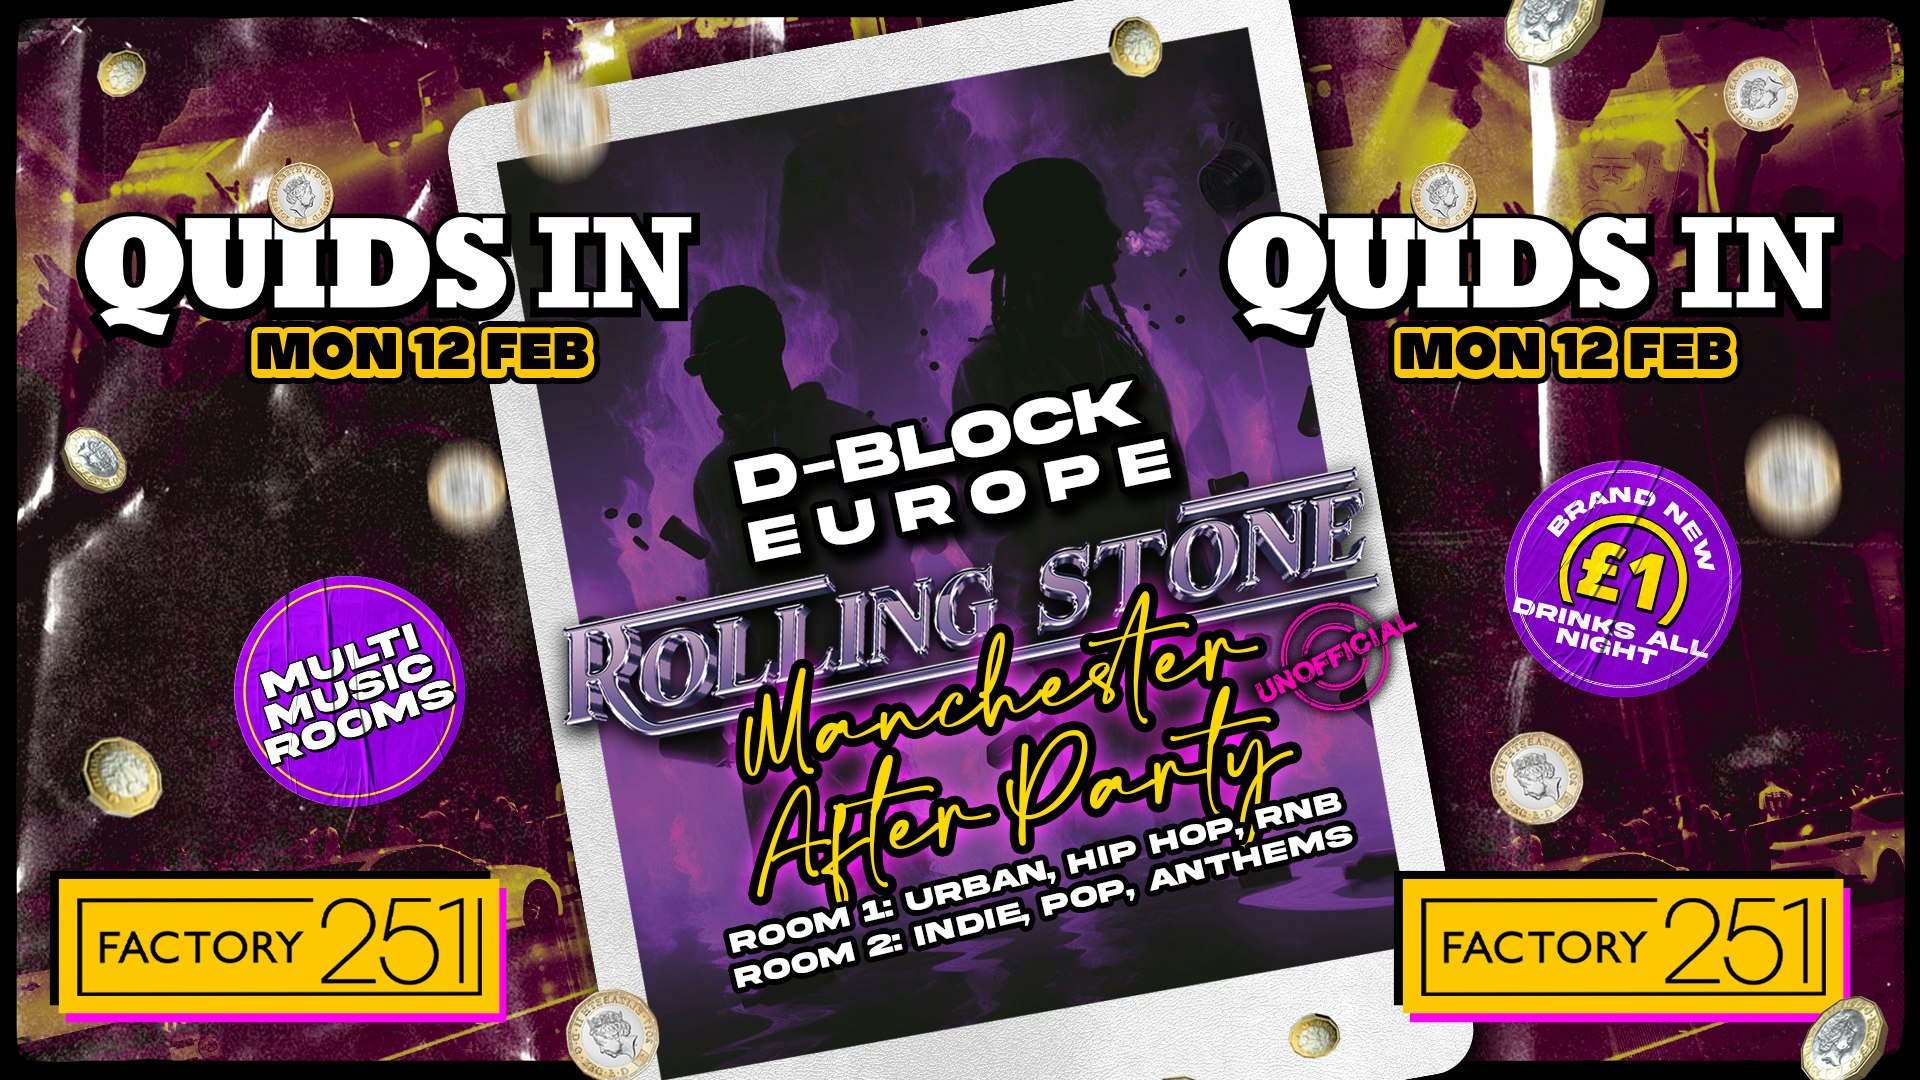 QUIDS IN MONDAYS 🏆 FACTORY !! ⭐️ D-BLOCK EUROPE AFTERPARTY ⭐️ UK’S Biggest Weekly Monday 🇬🇧 £1 Drinks 🥤